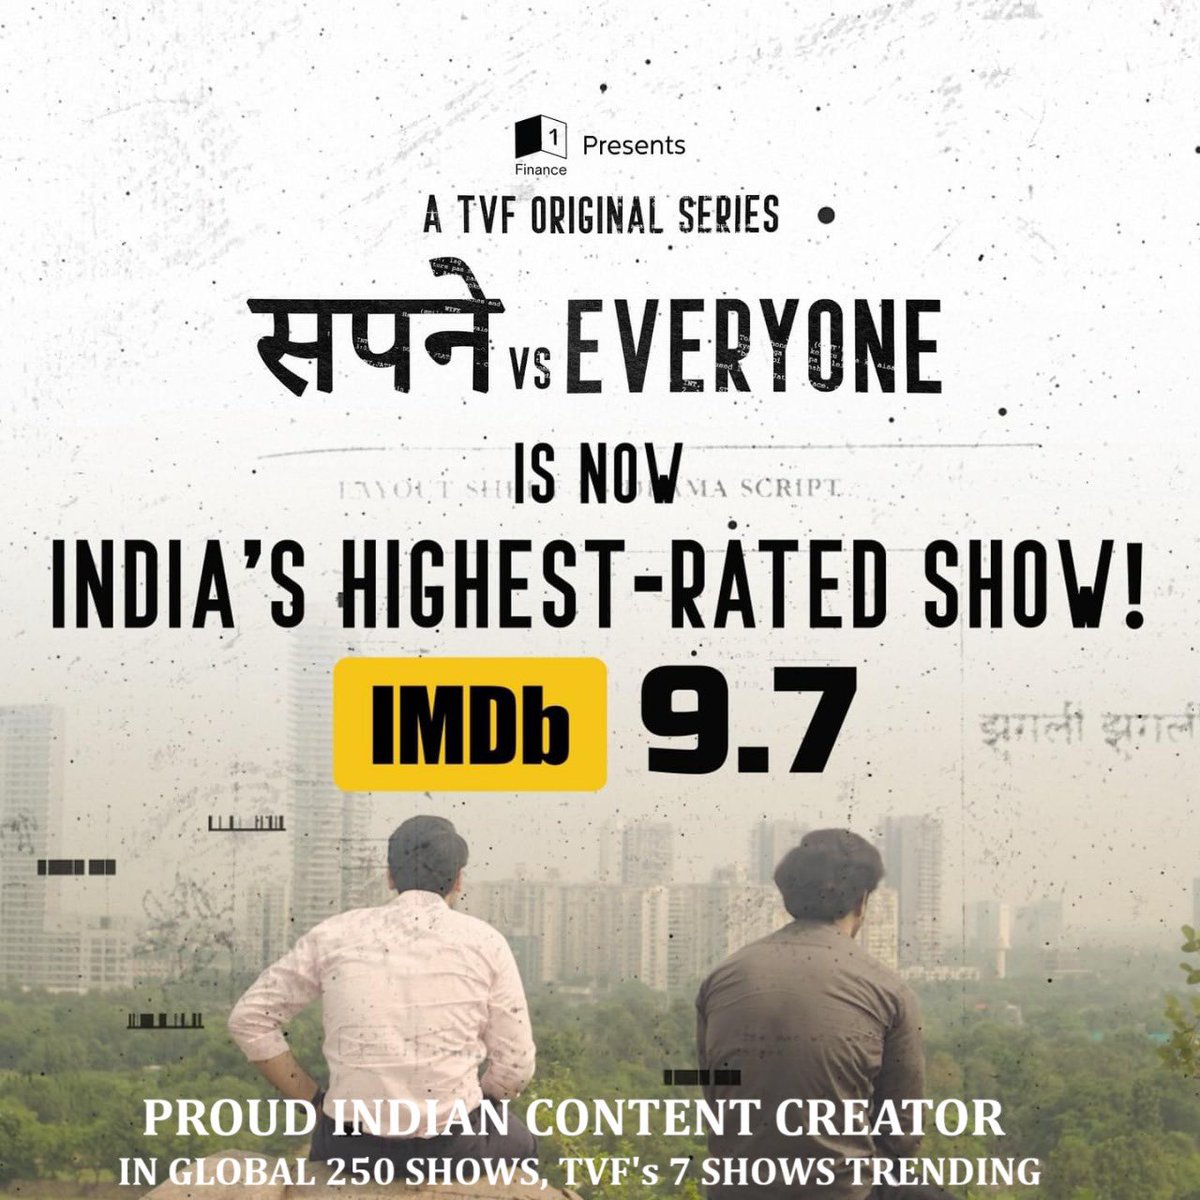 TVF’S 7 SHOWS IN GLOBAL TOP 250… #TVF hits the ball out of the park and makes an indelible impression on the global stage.

After #Aspirants, #Panchayat, #Gullak, #YehMeriFamily, #KotaFactory and #Pitchers, now #SapneVsEveryone becomes the 7th #TVF show to enter #IMDb Top 250 TV…